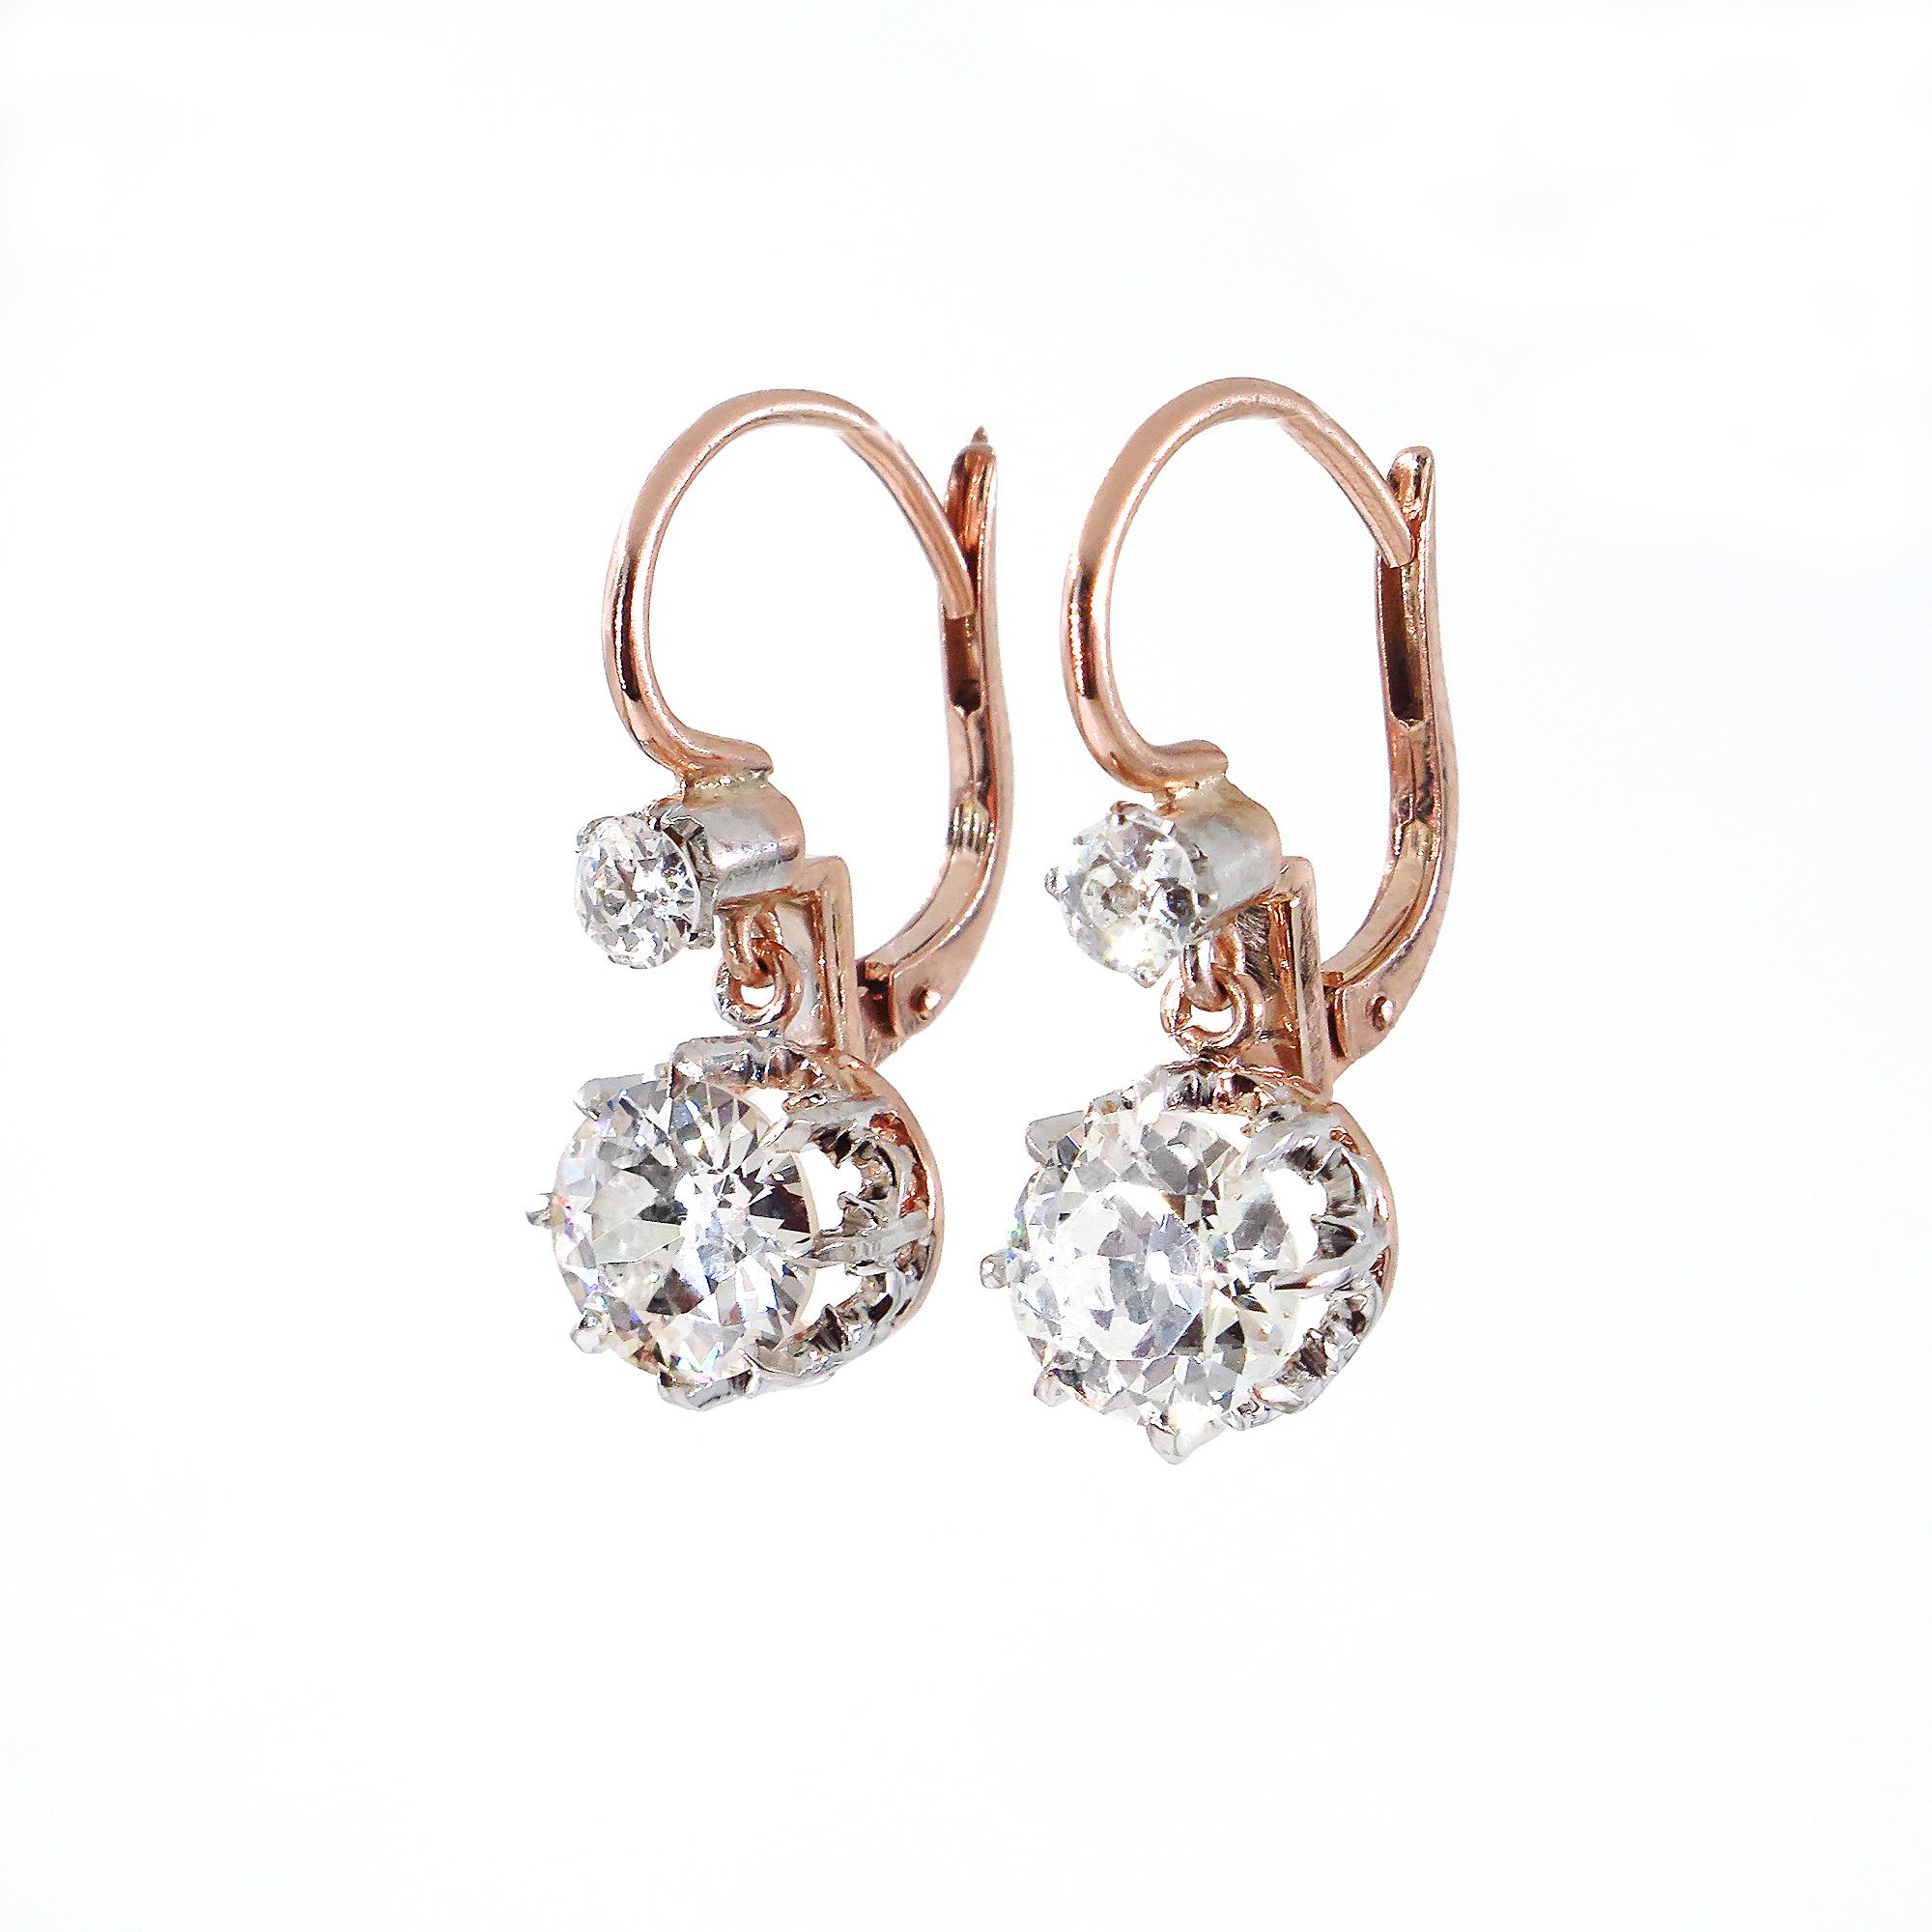 Unique and Exquisite pair of The End of the 19th CENTURY, A BEAUTIFUL Pair of Original Late Victorian- Early Edwardian Era Platinum & 18k Rose Gold ( tested ) Earrings with shimmering Old European cut Diamonds.
Most beautiful and unique European